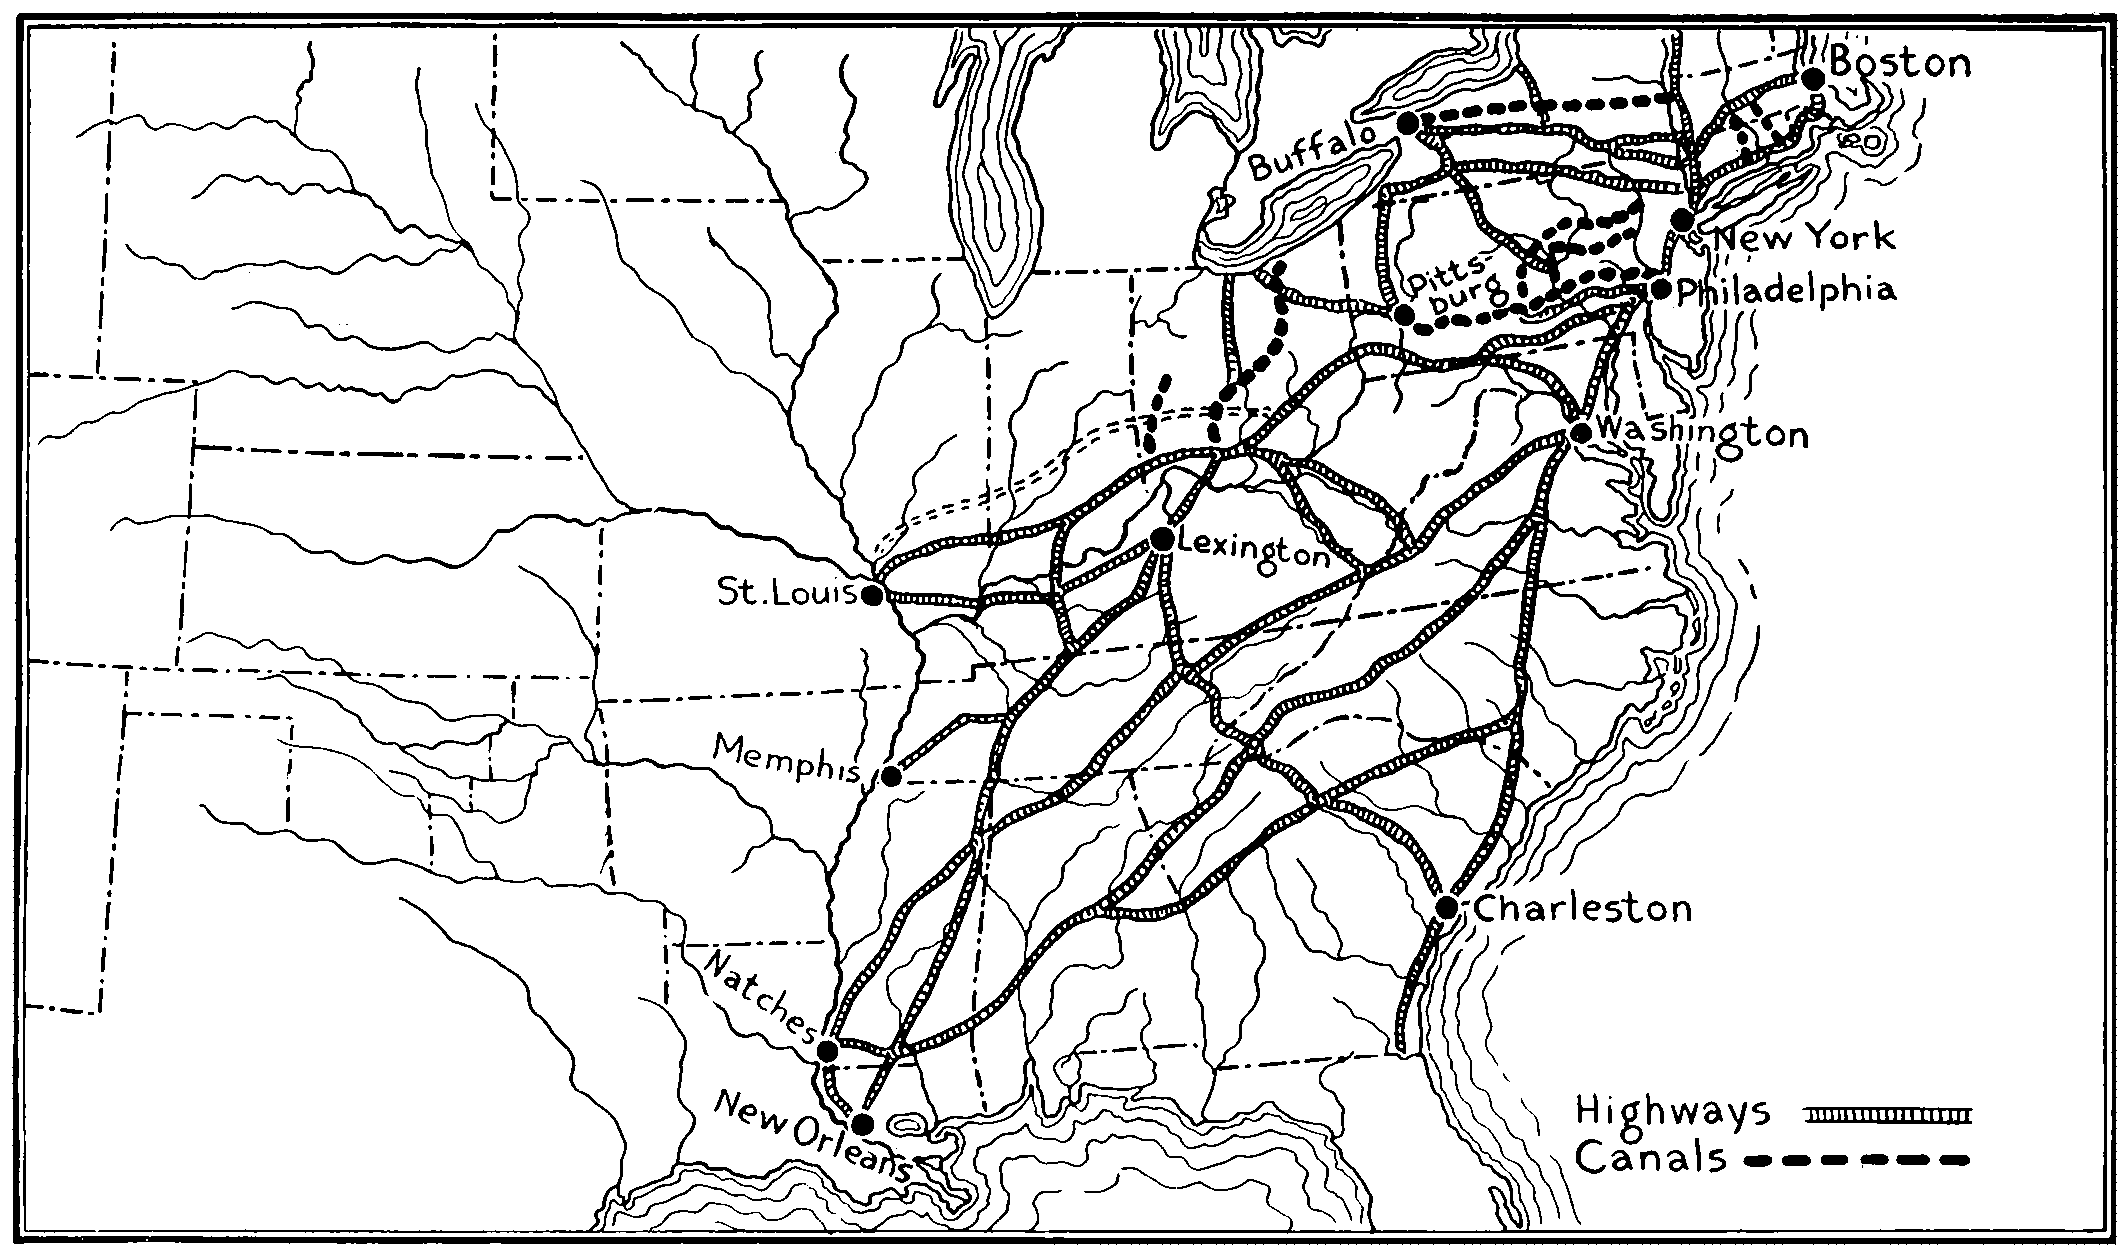 Highways And Highway Transportation, by George R. Chatburn—A